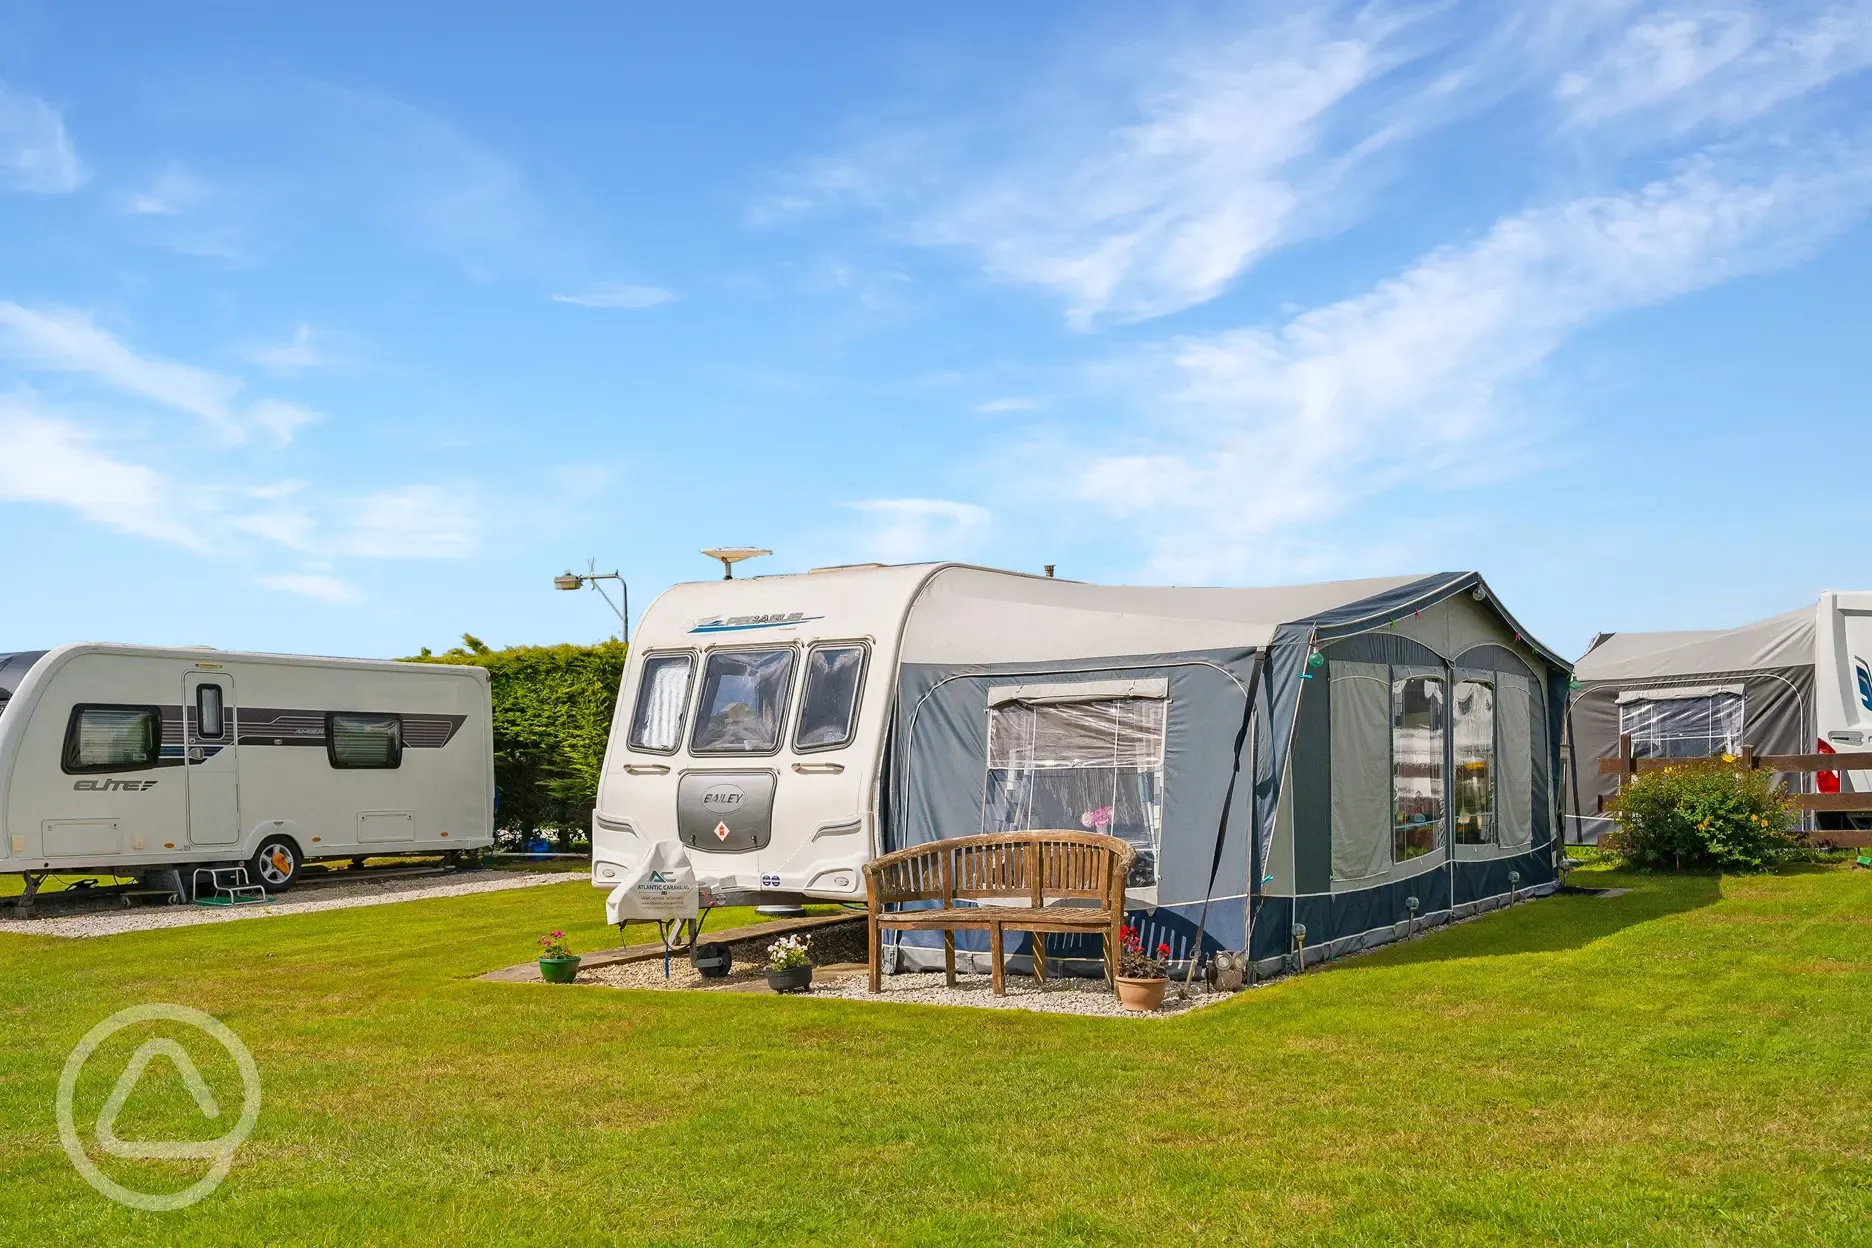 Fully serviced hardstanding pitches